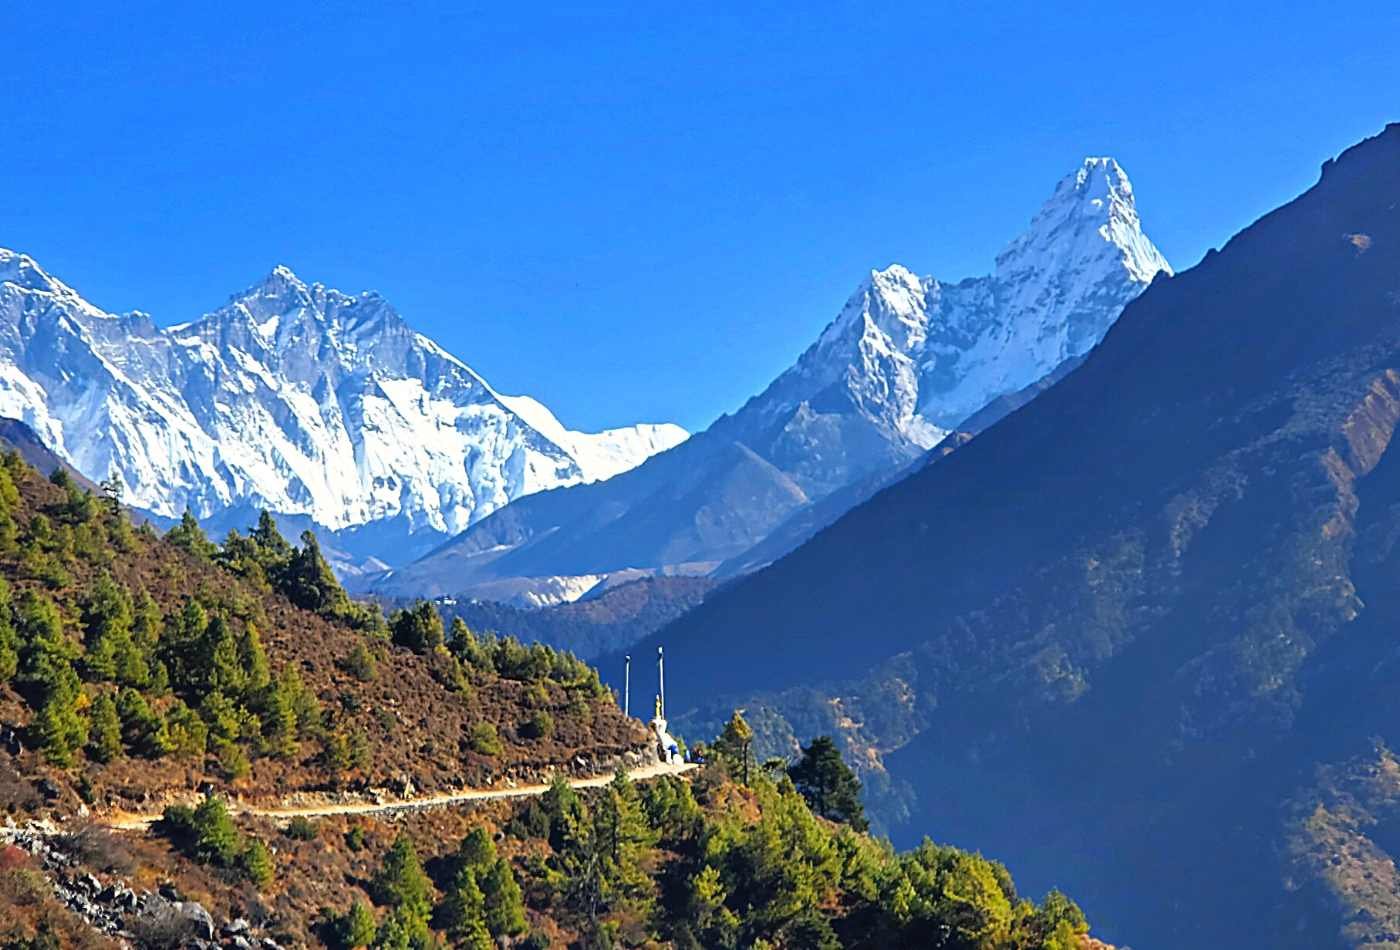 View of Mt. Amadablam and Mt. Lhotse from Namche Bazaar, a picturesque mountain village, on a clear day with clear visibility of the peaks.